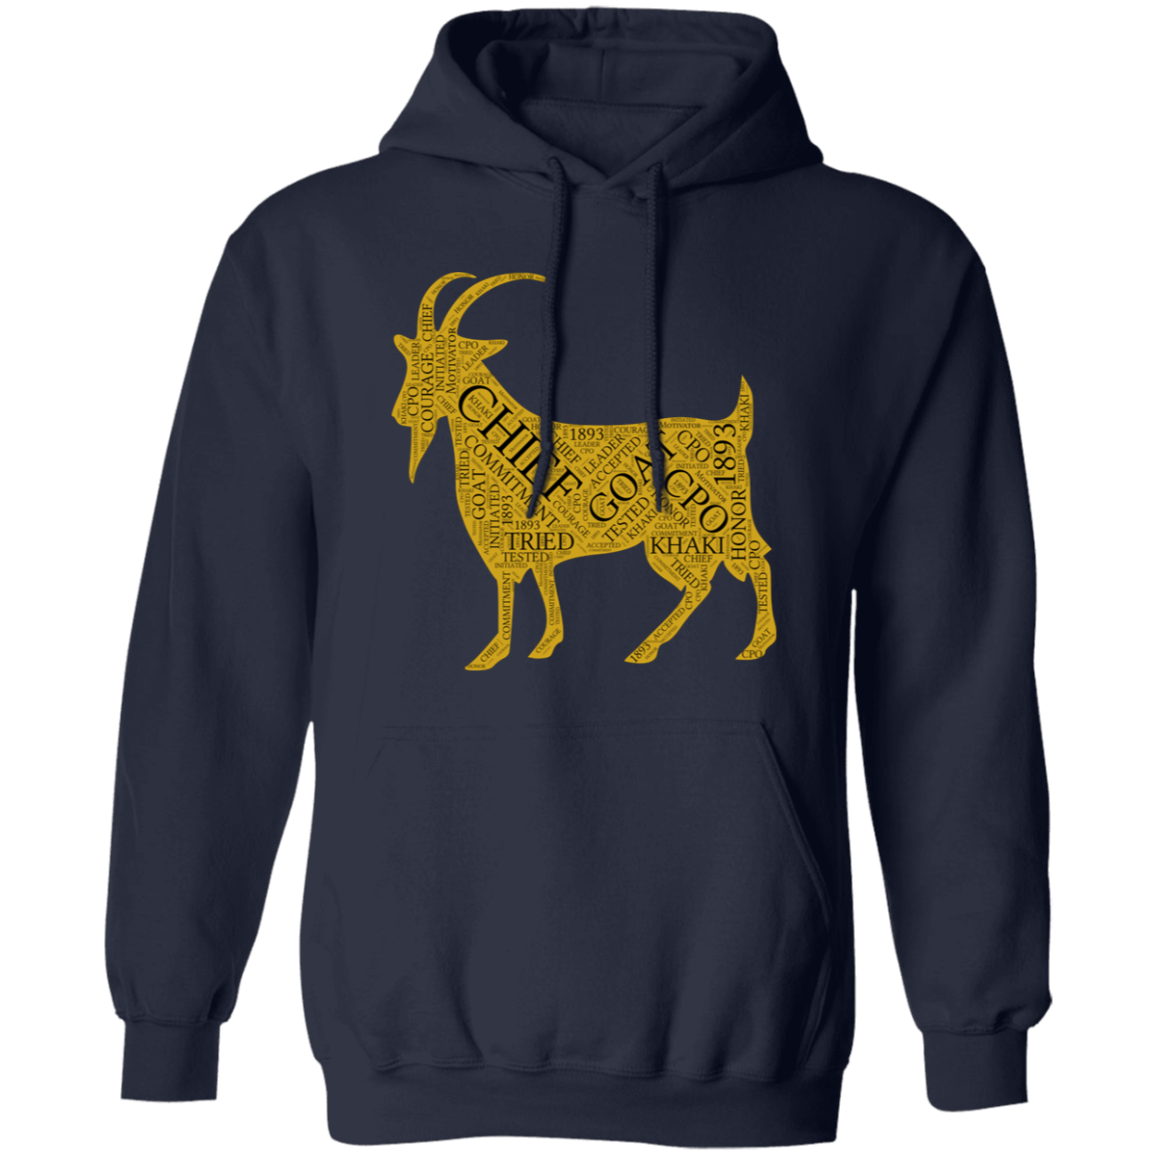 Goat Word Gold Pullover Hoodie